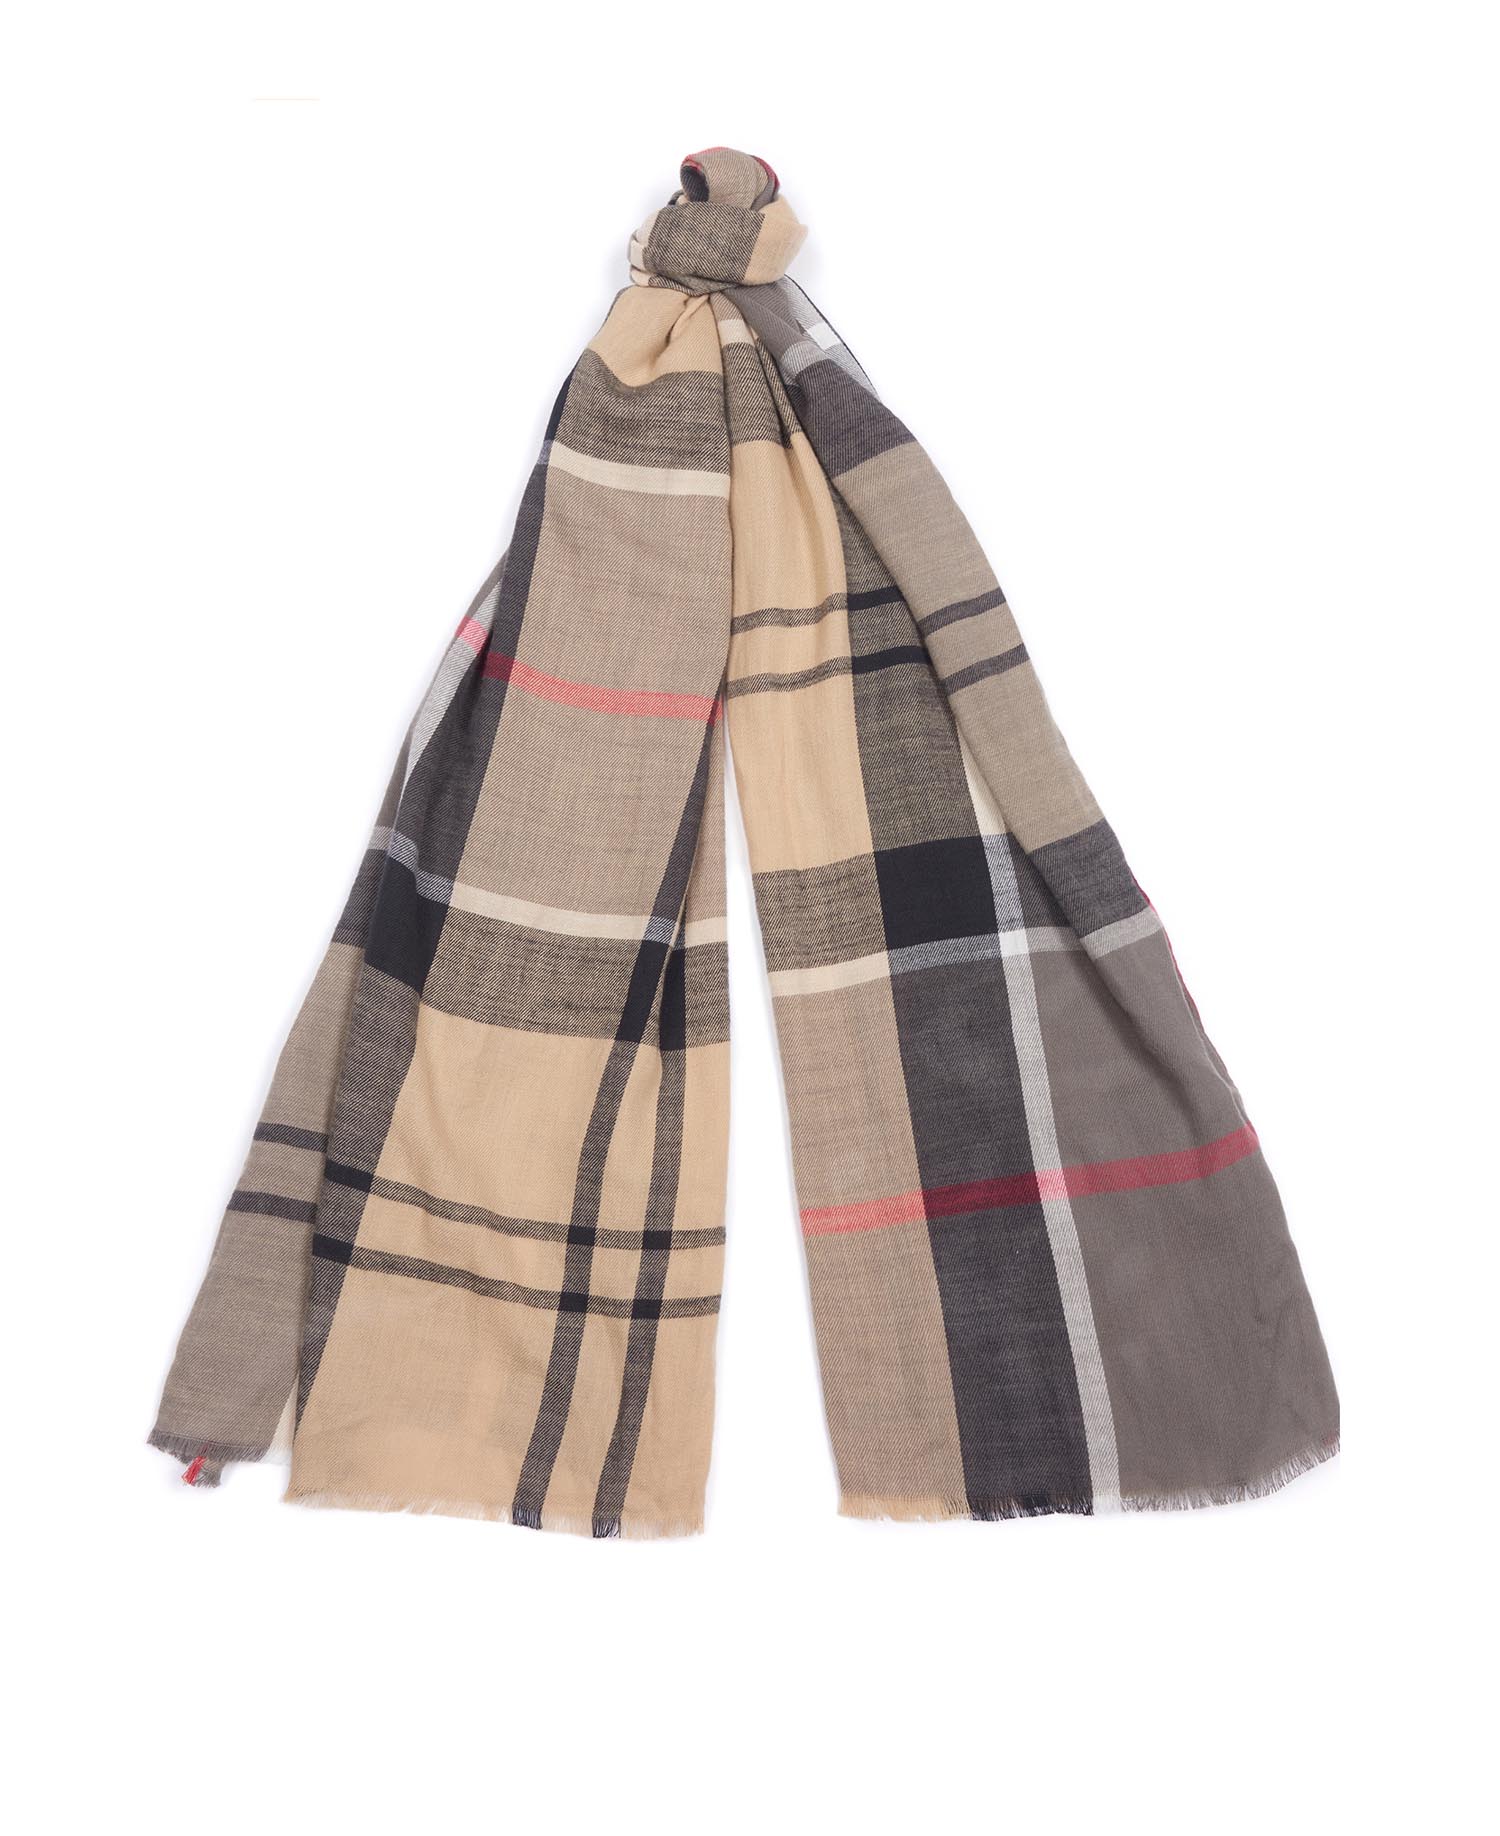 Barbour Walshaw Scarf in Tartan | Barbour